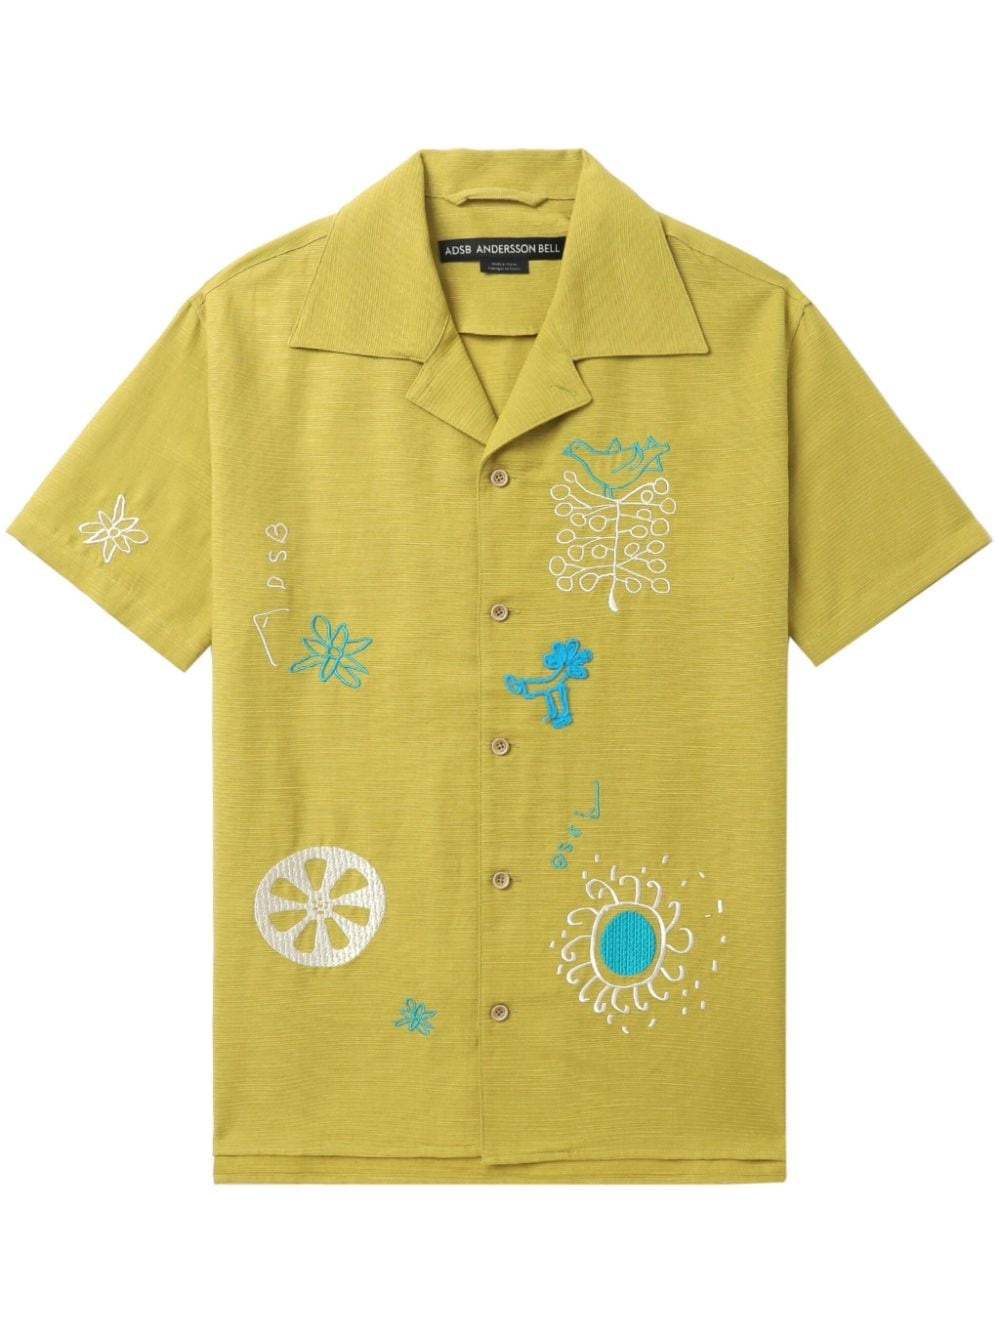 April-embroidery shirt - 1